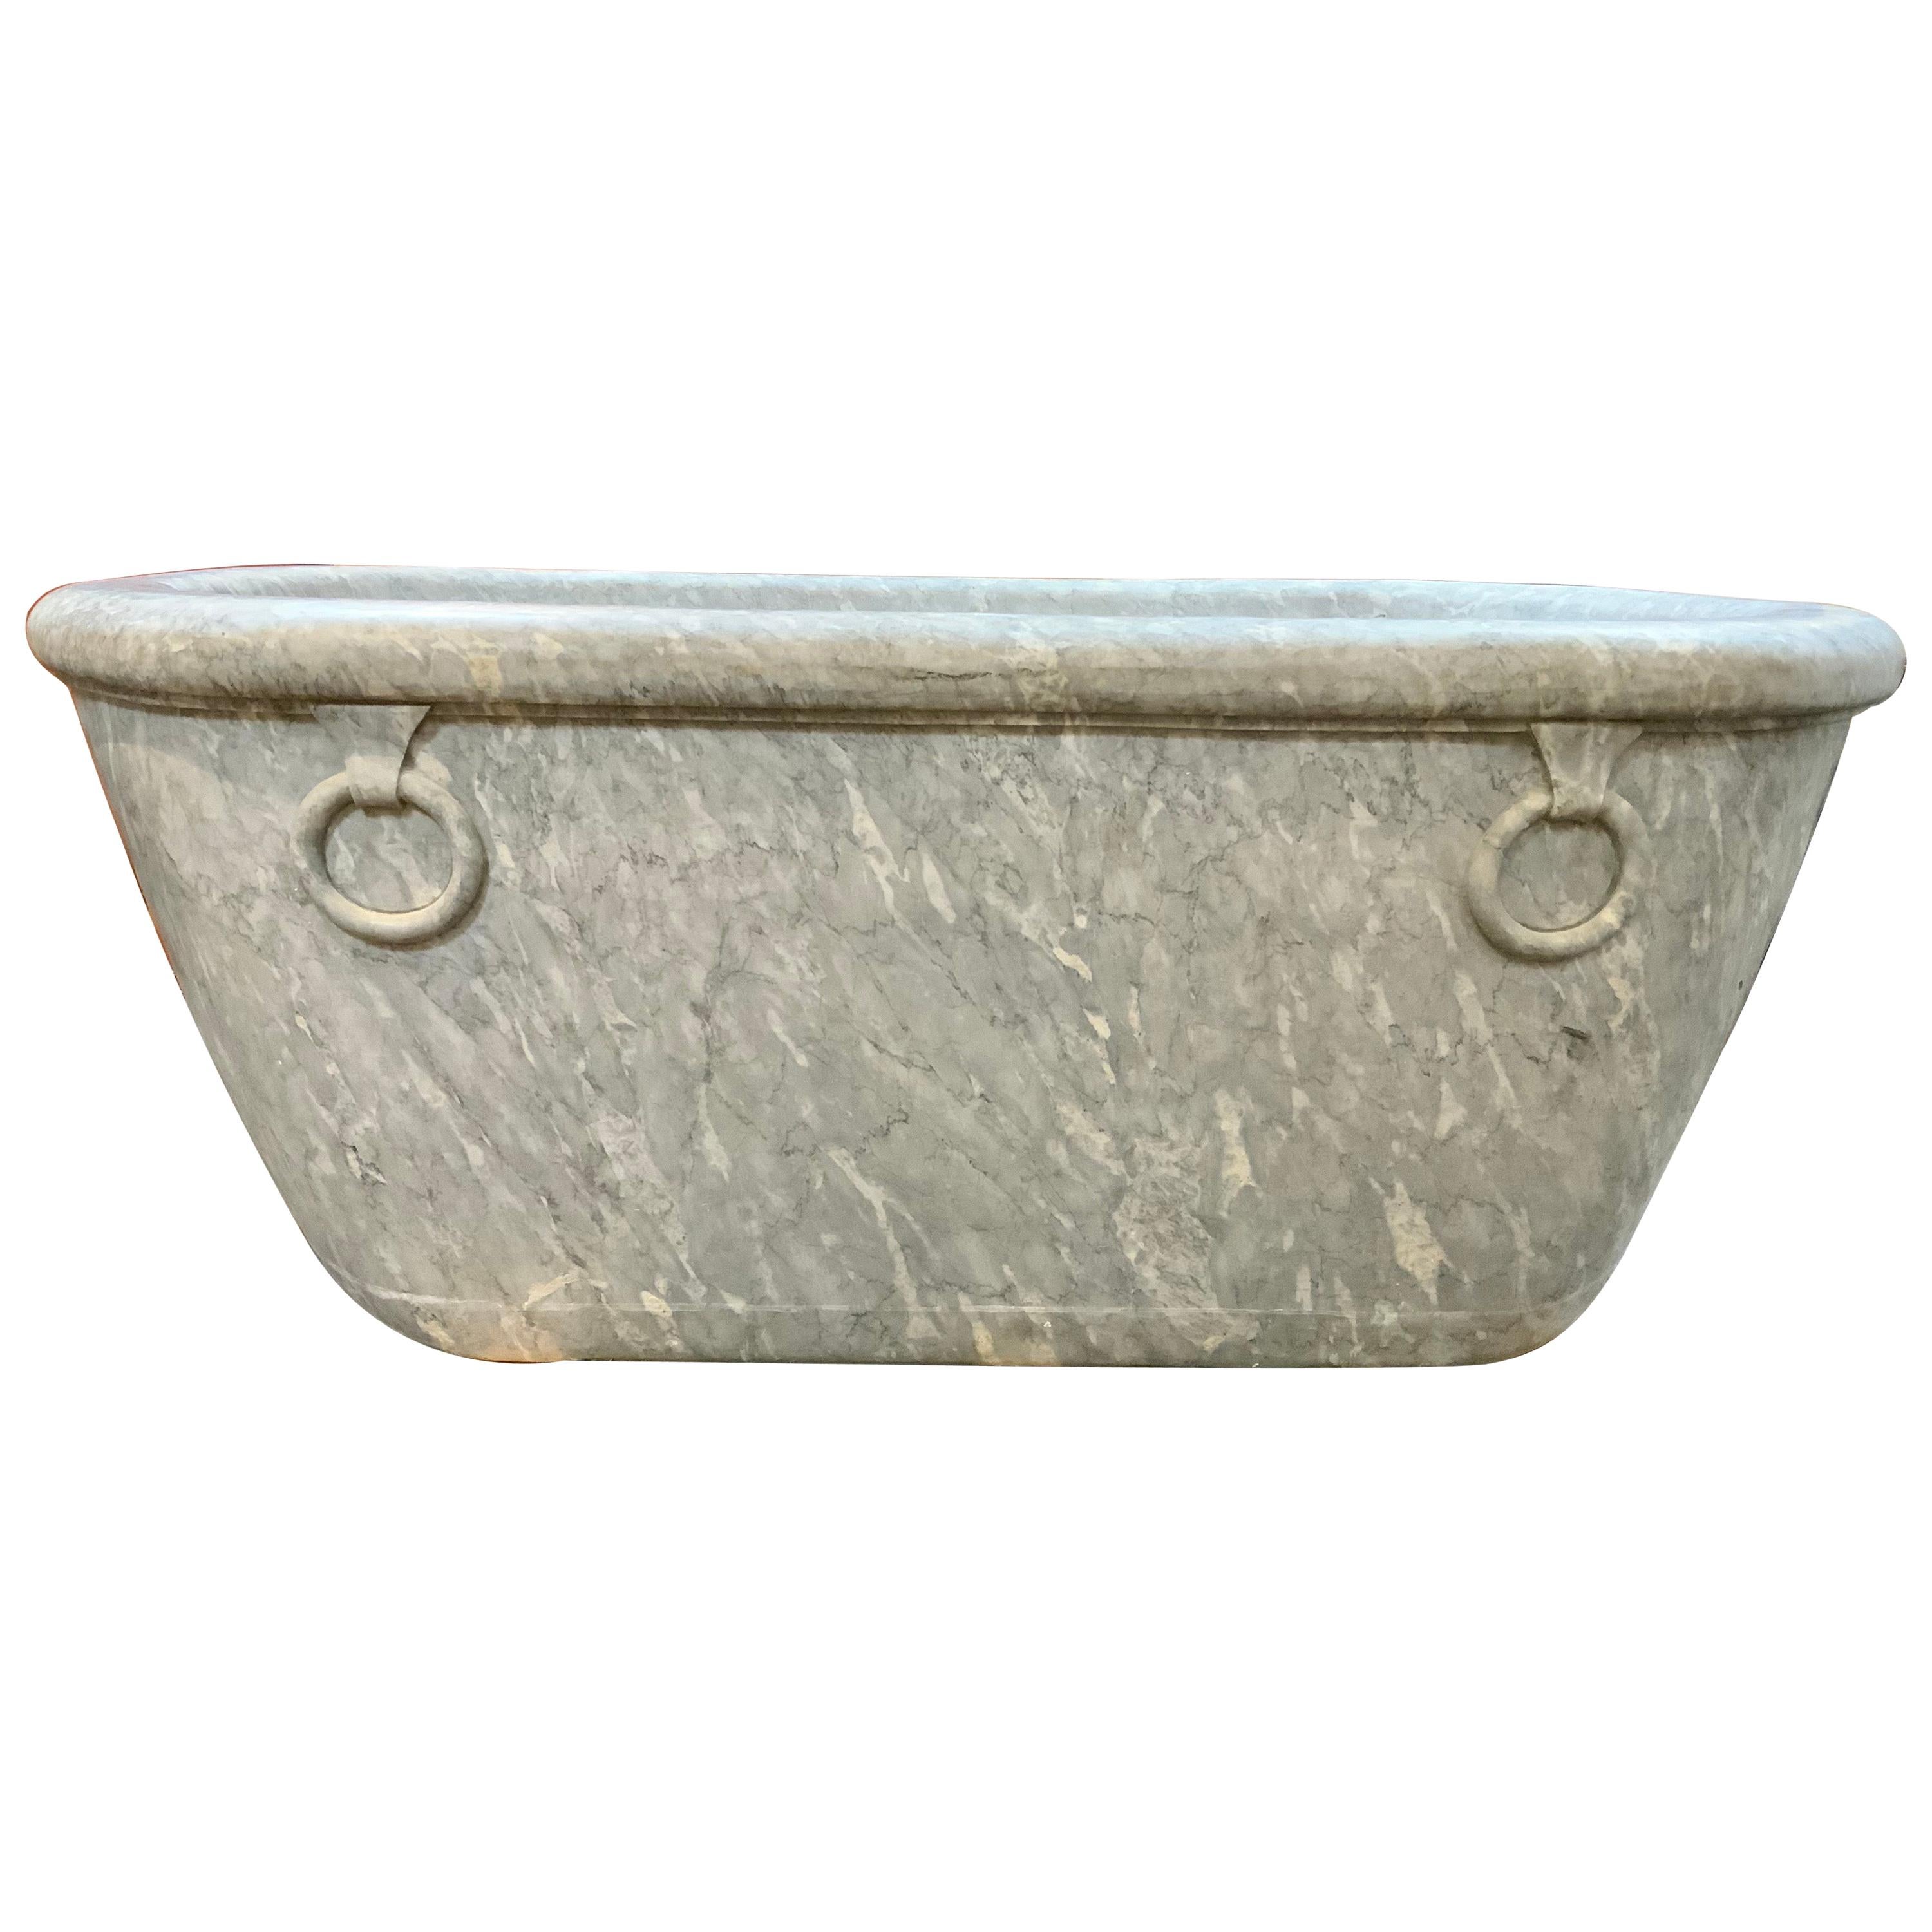 19th Century Marble Basin Tub from Italy For Sale